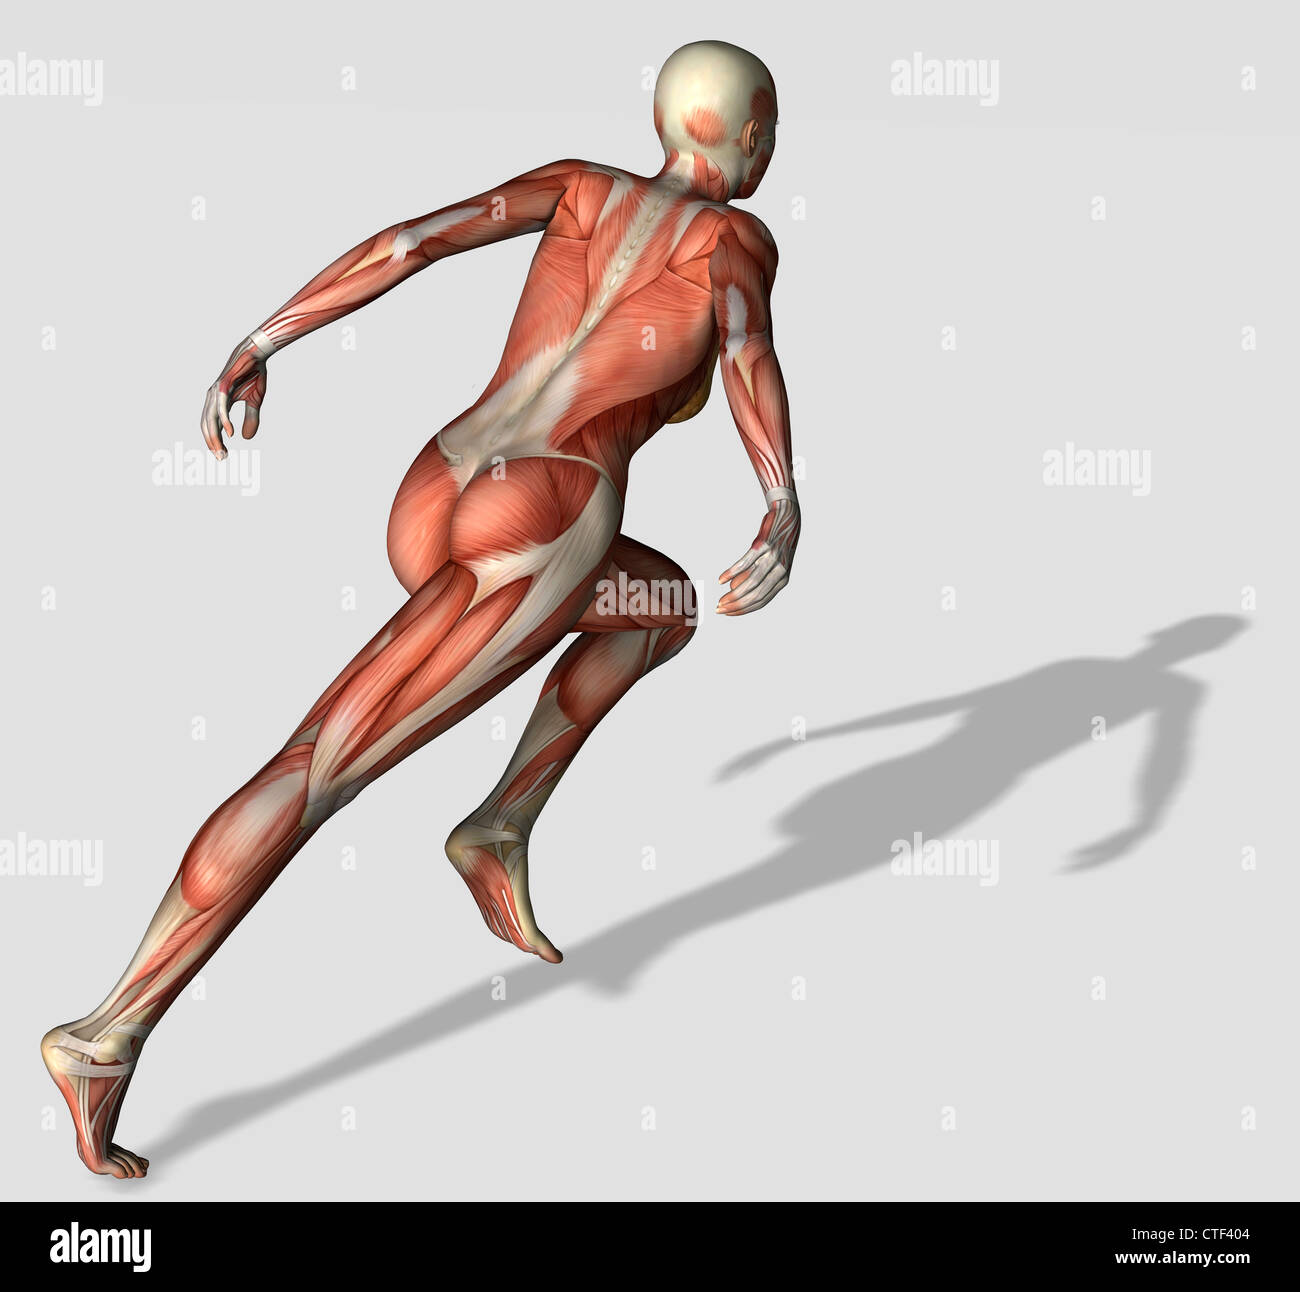 Digitally generated image of running human representation with human muscles visible Stock Photo